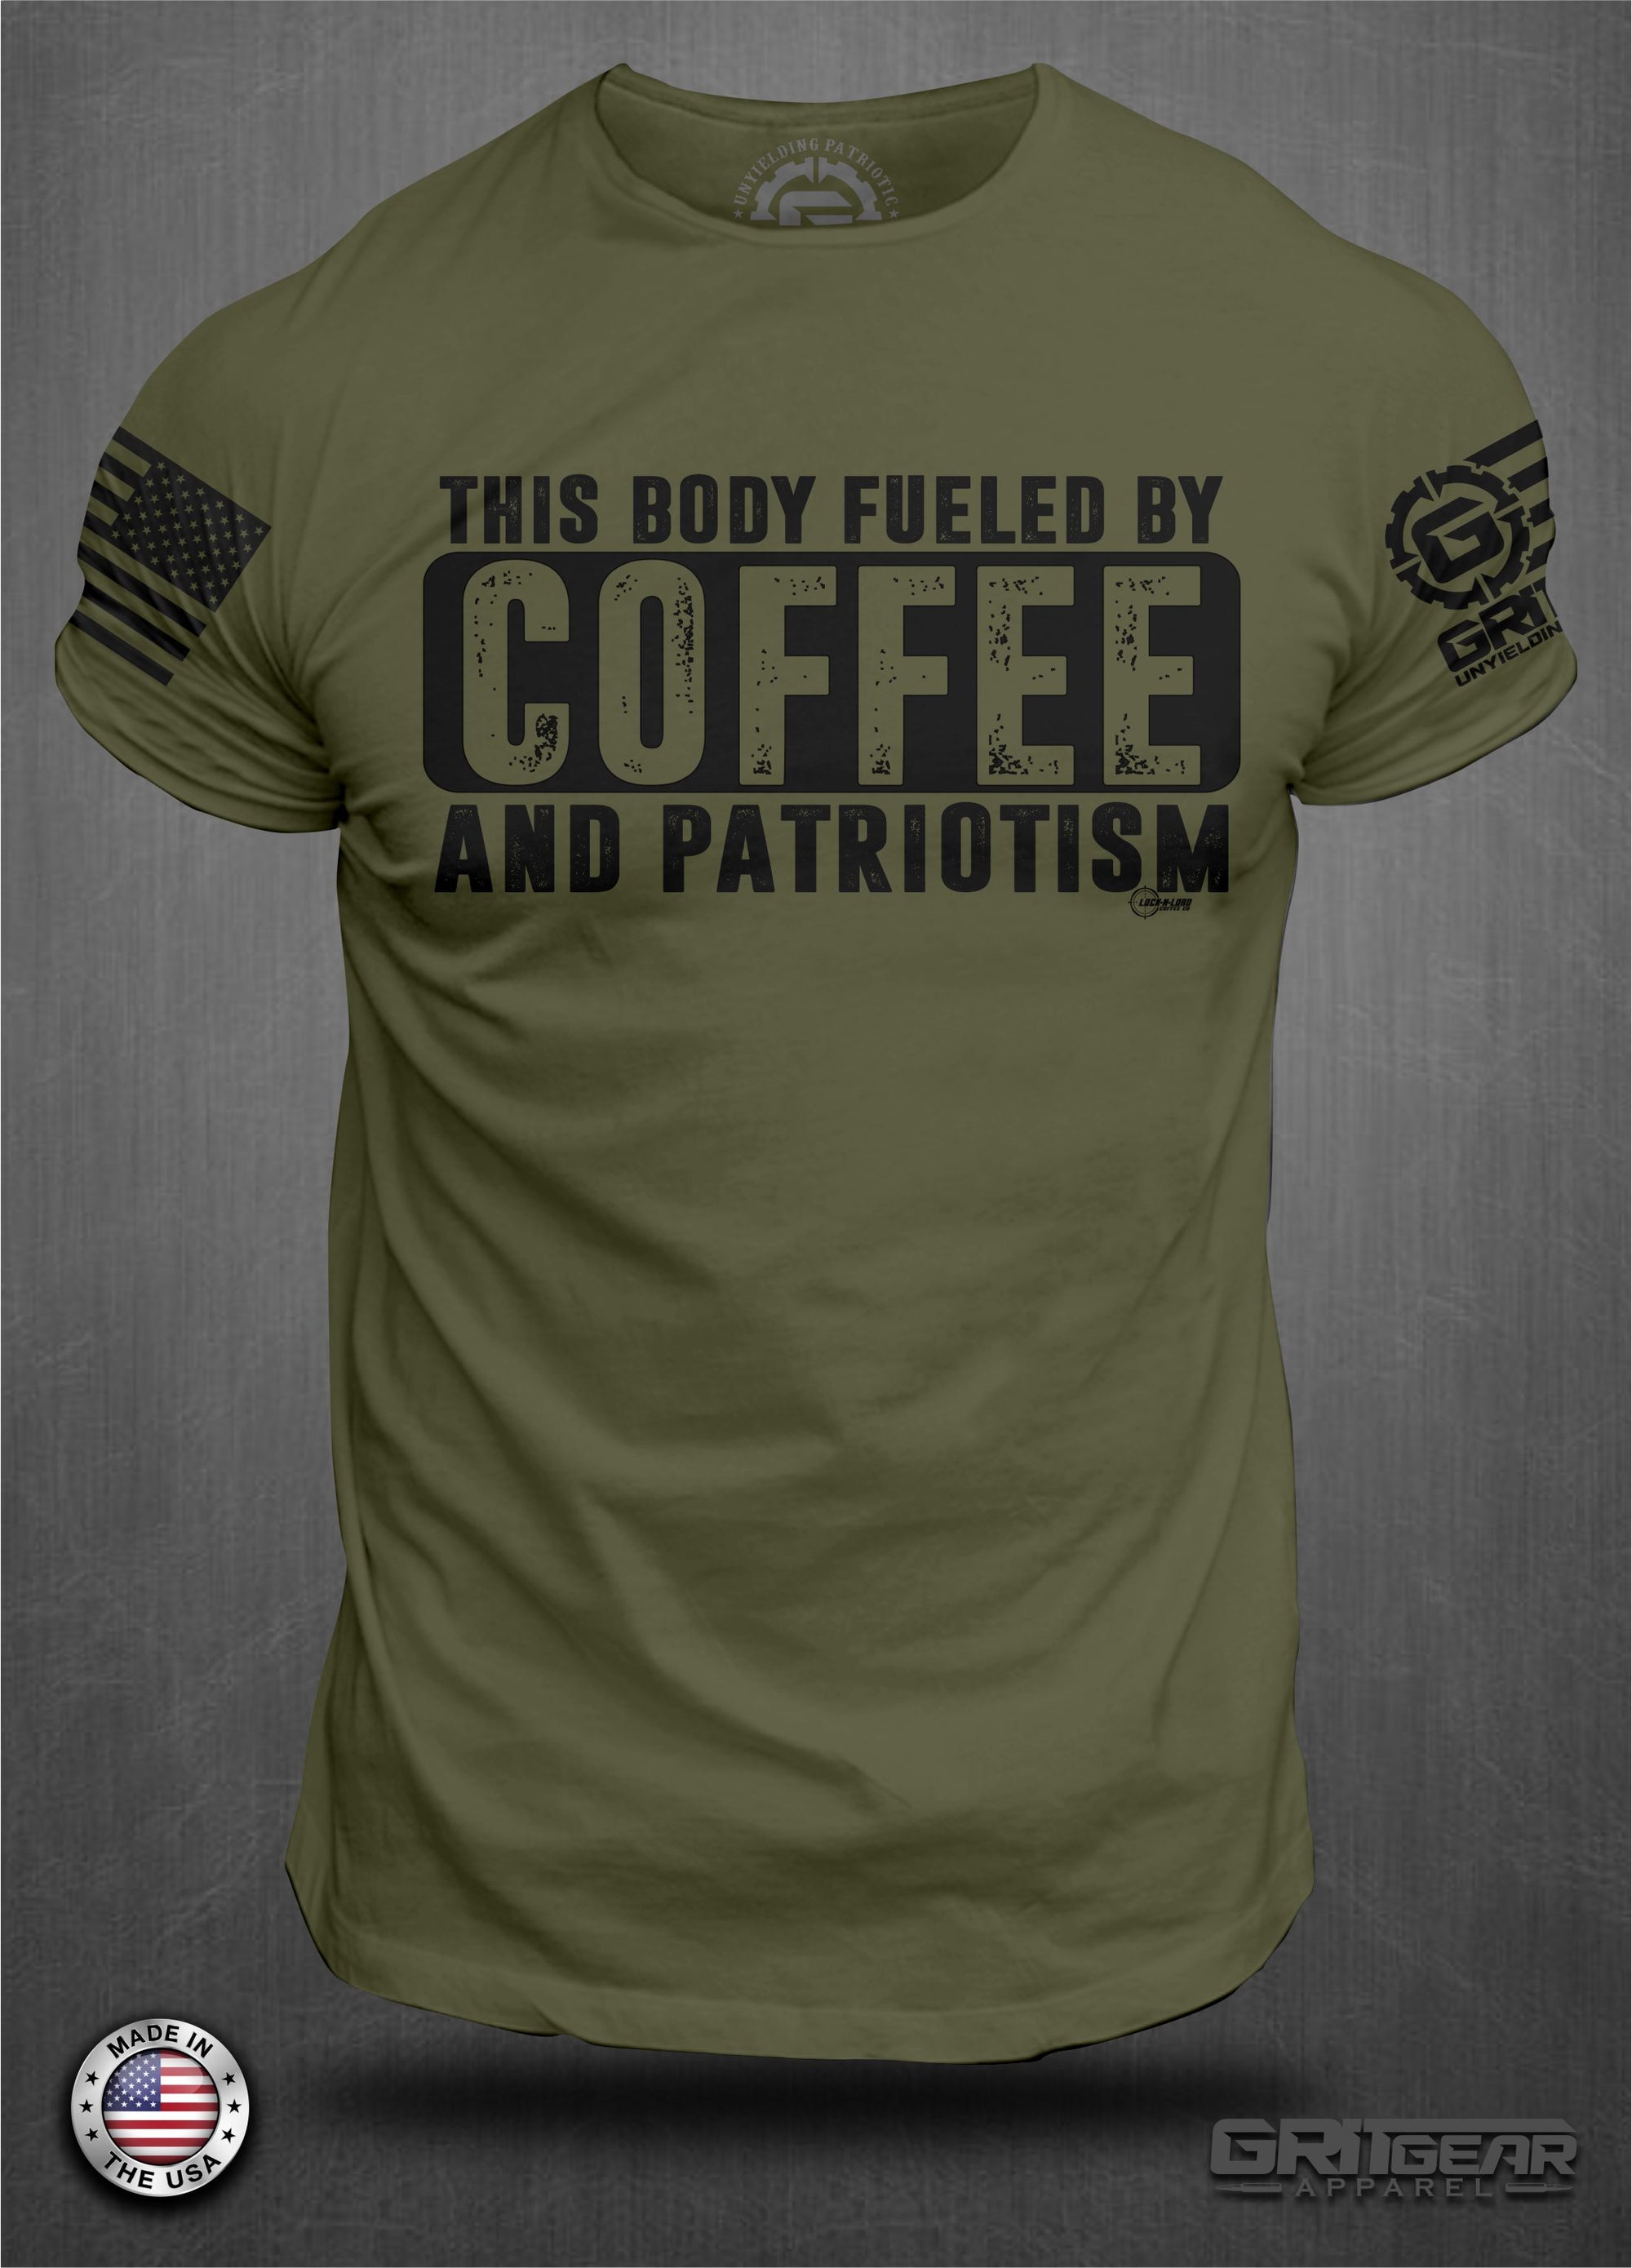 Fueled by Coffee and Patriotism T-Shirt | GRITGEAR™ Apparel